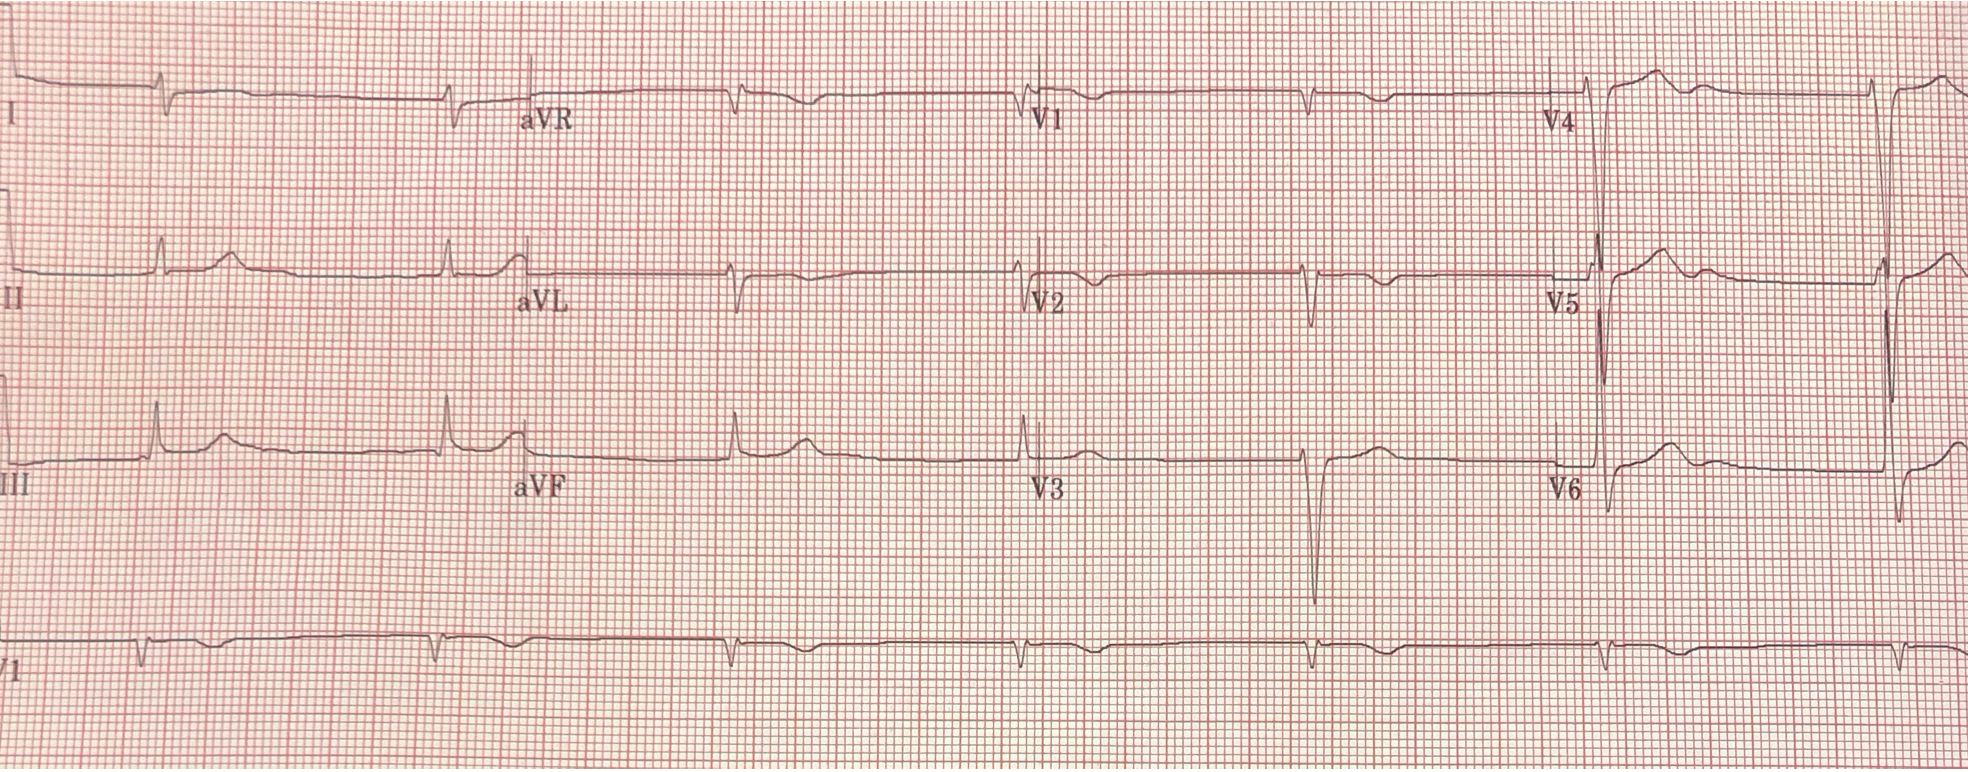 Case Report: Junctional Bradycardia in a 42-Year-Old Male